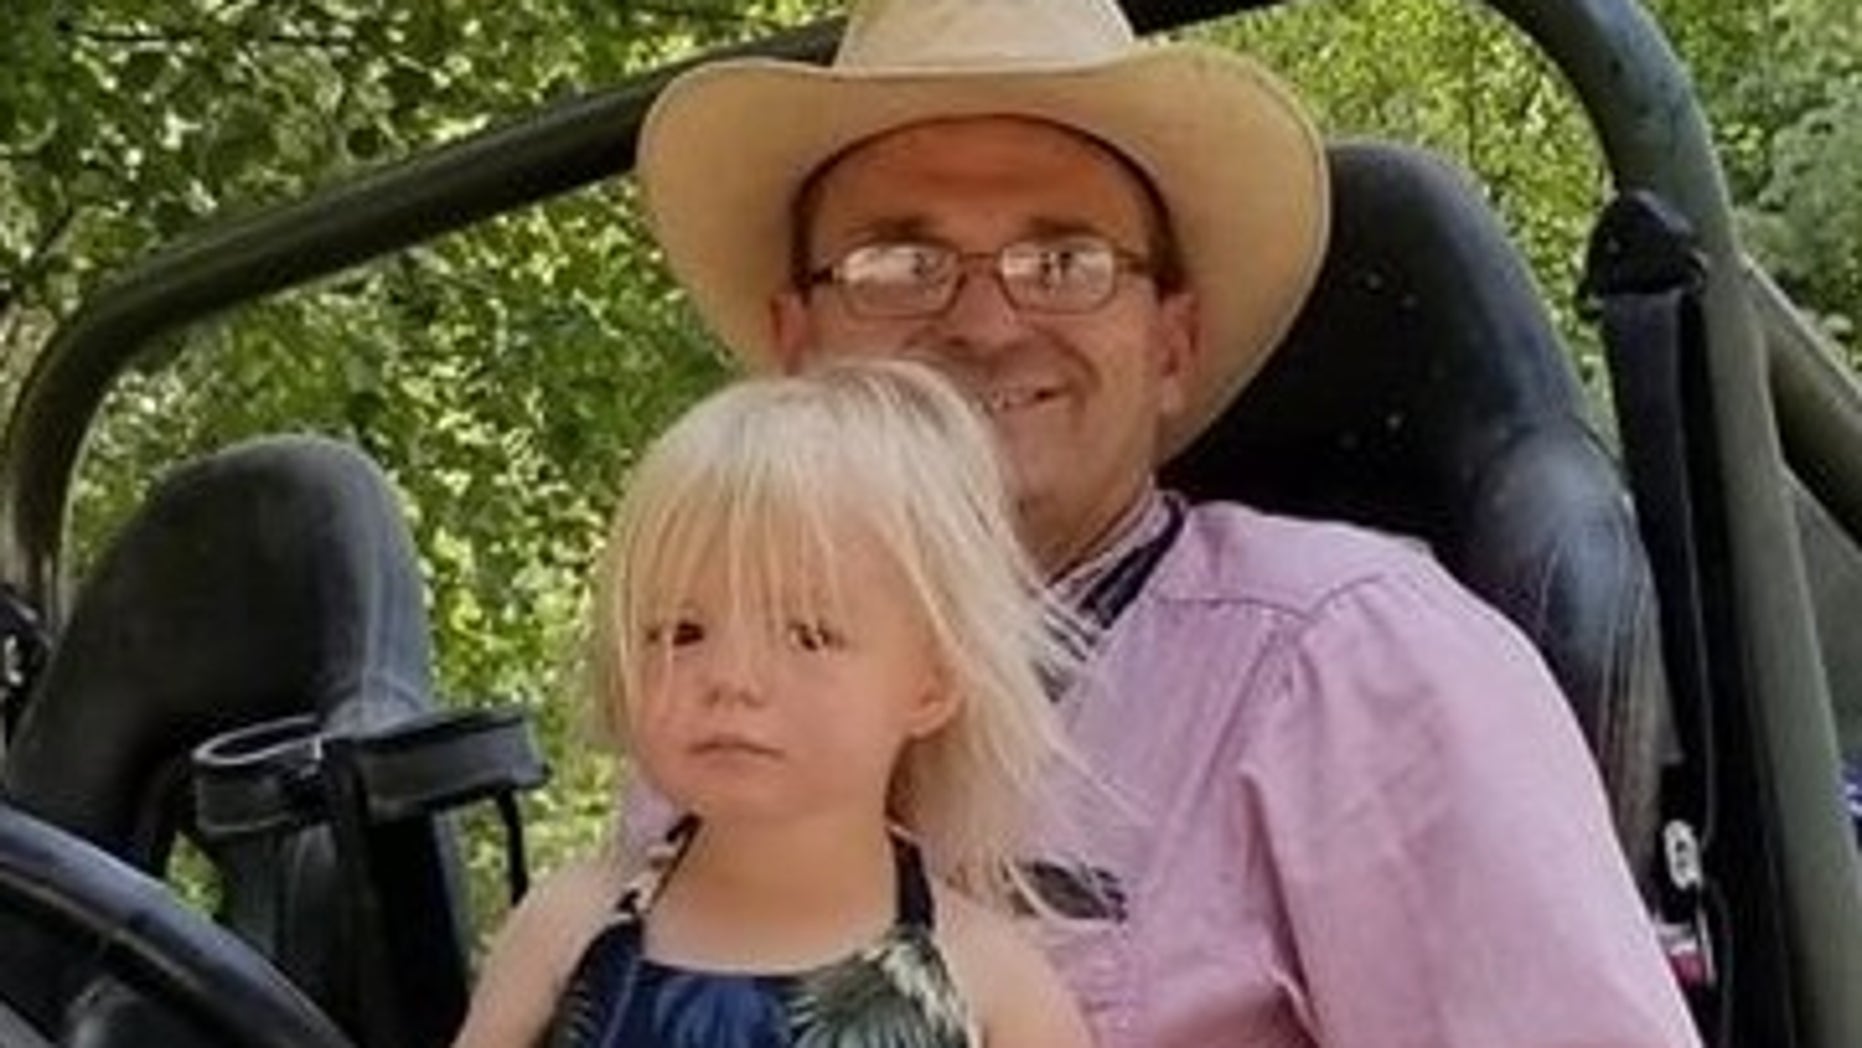 Gary Giles, 55, died Sunday after a week-long struggle with the disease that began with neck and back pain.